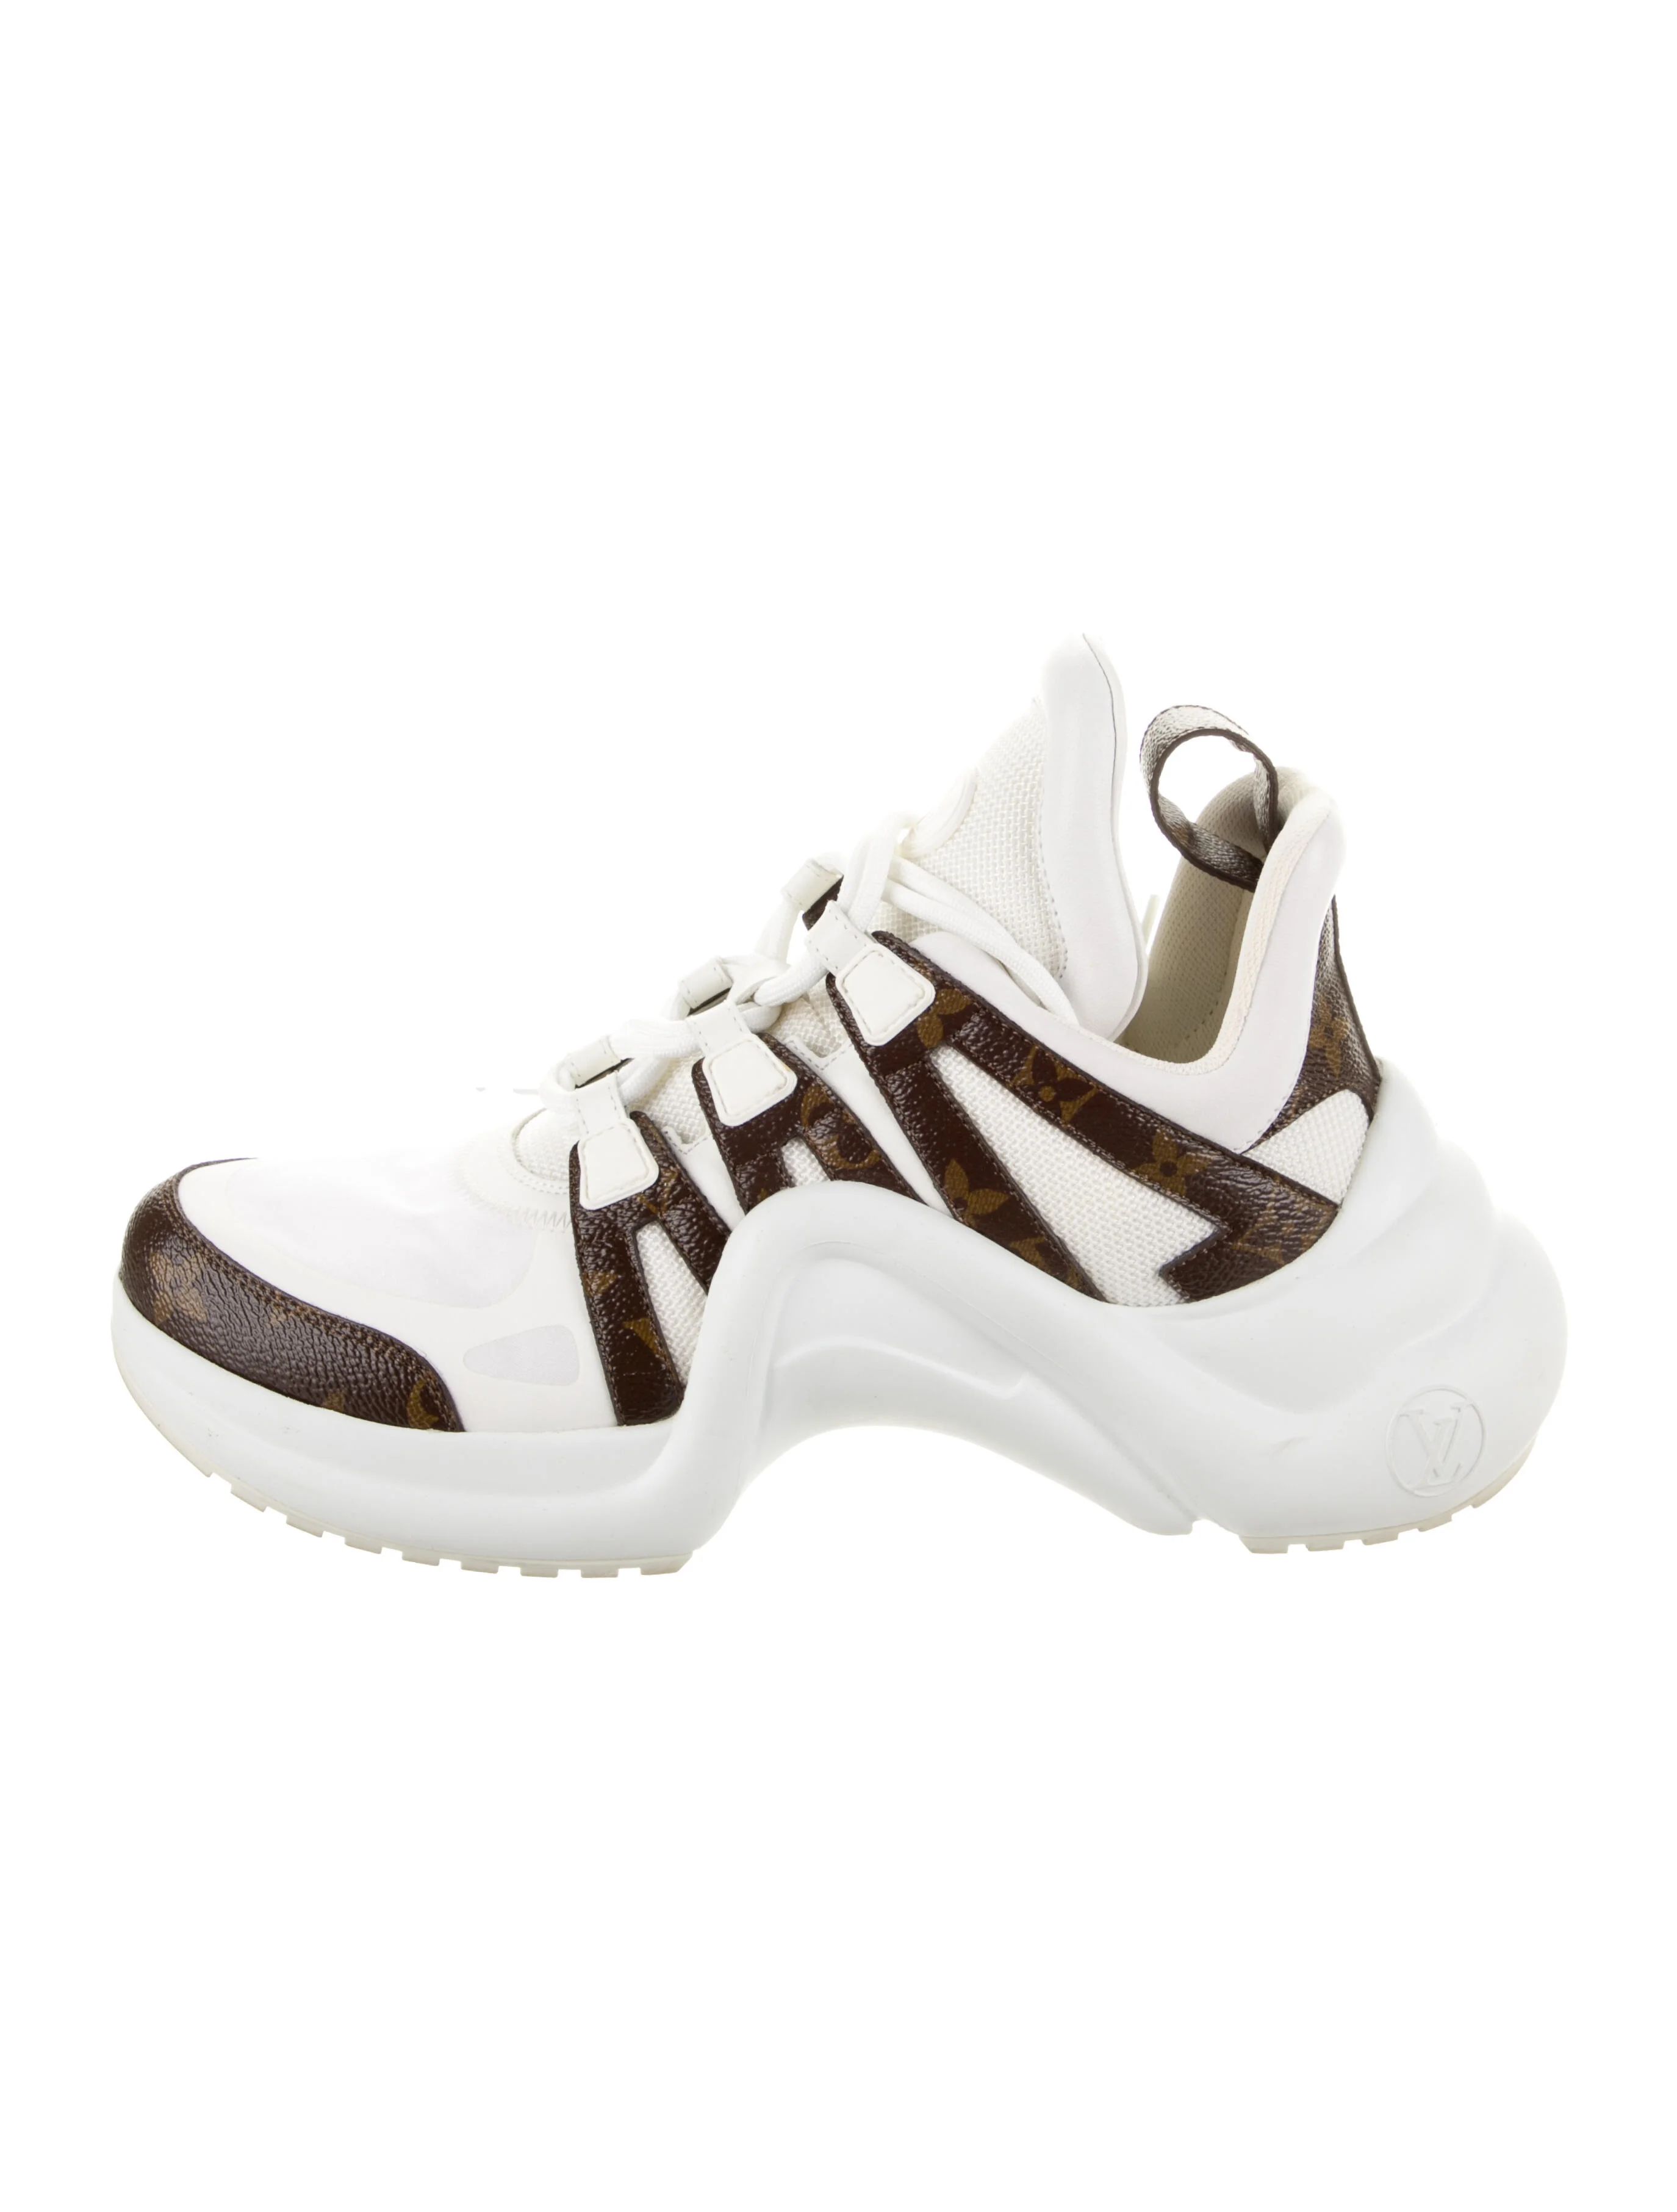 Archlight Trainers Chunky Sneakers | The RealReal